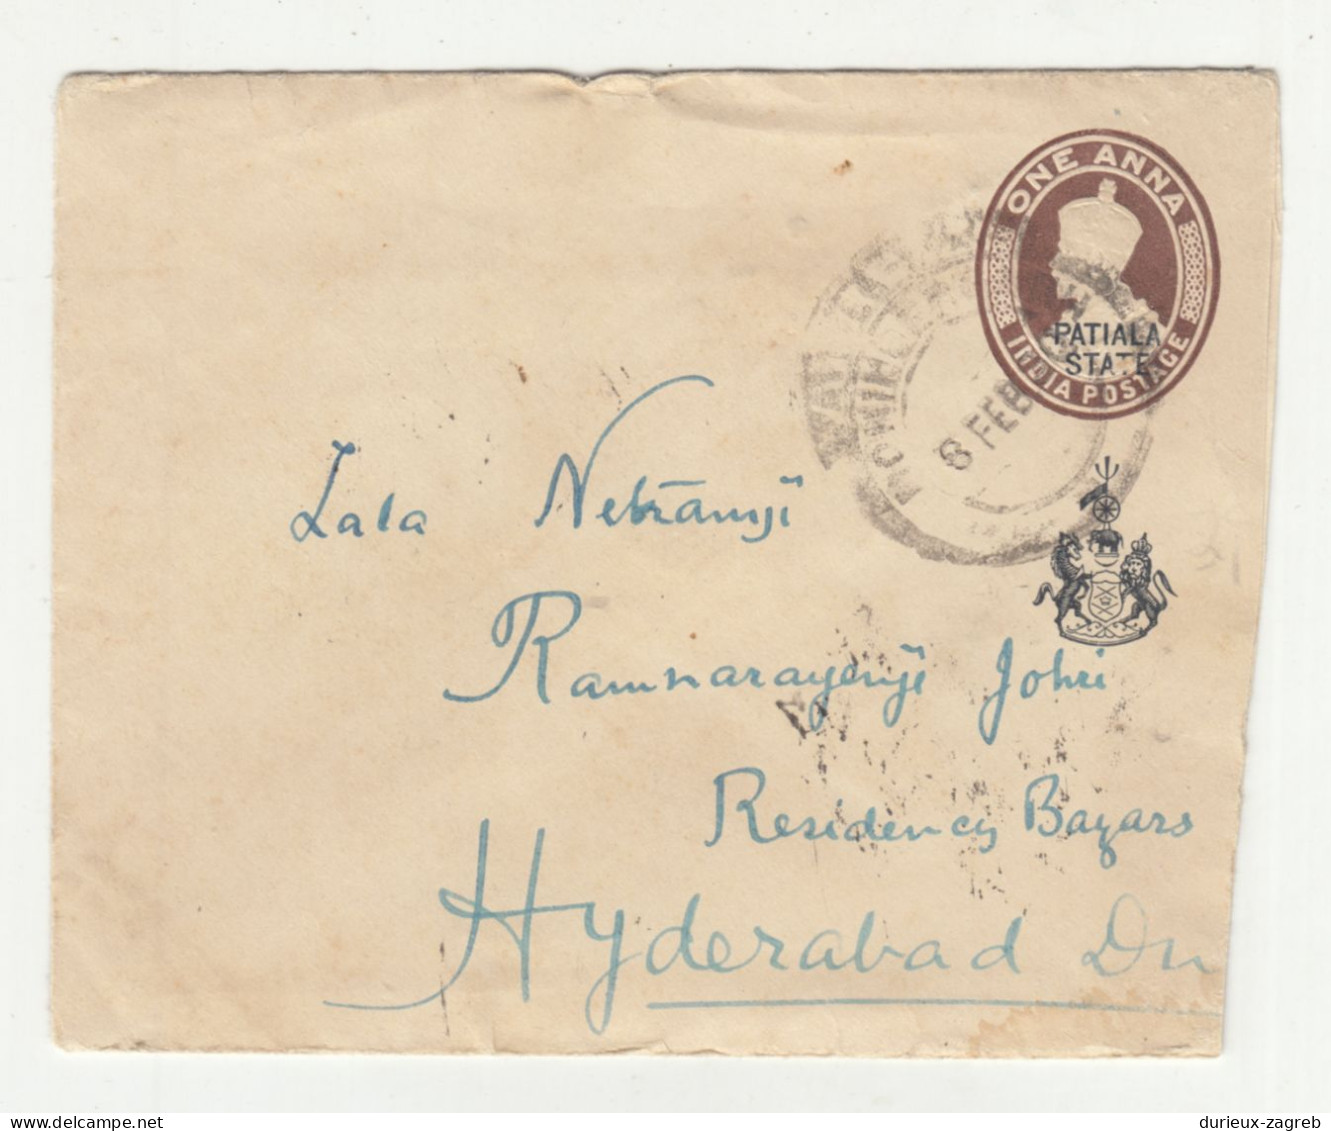 India Patiala State Old Postal Stationery Letter Cover Posted 1930 B240205 - 1911-35 King George V